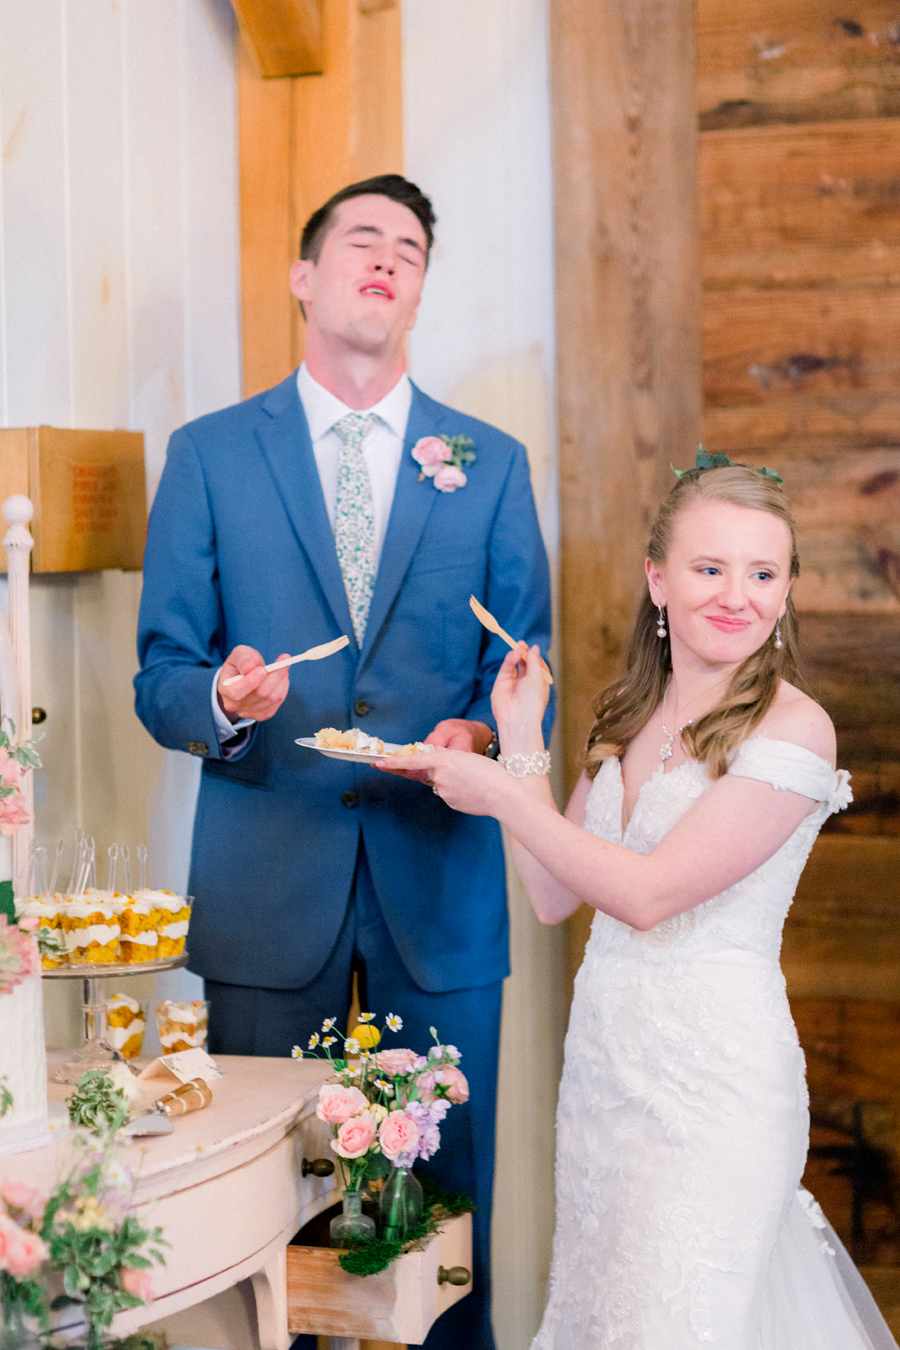 The bride smiles at guests as she tries the cake at a Blue Bell Farm wedding by Love Tree Studios.